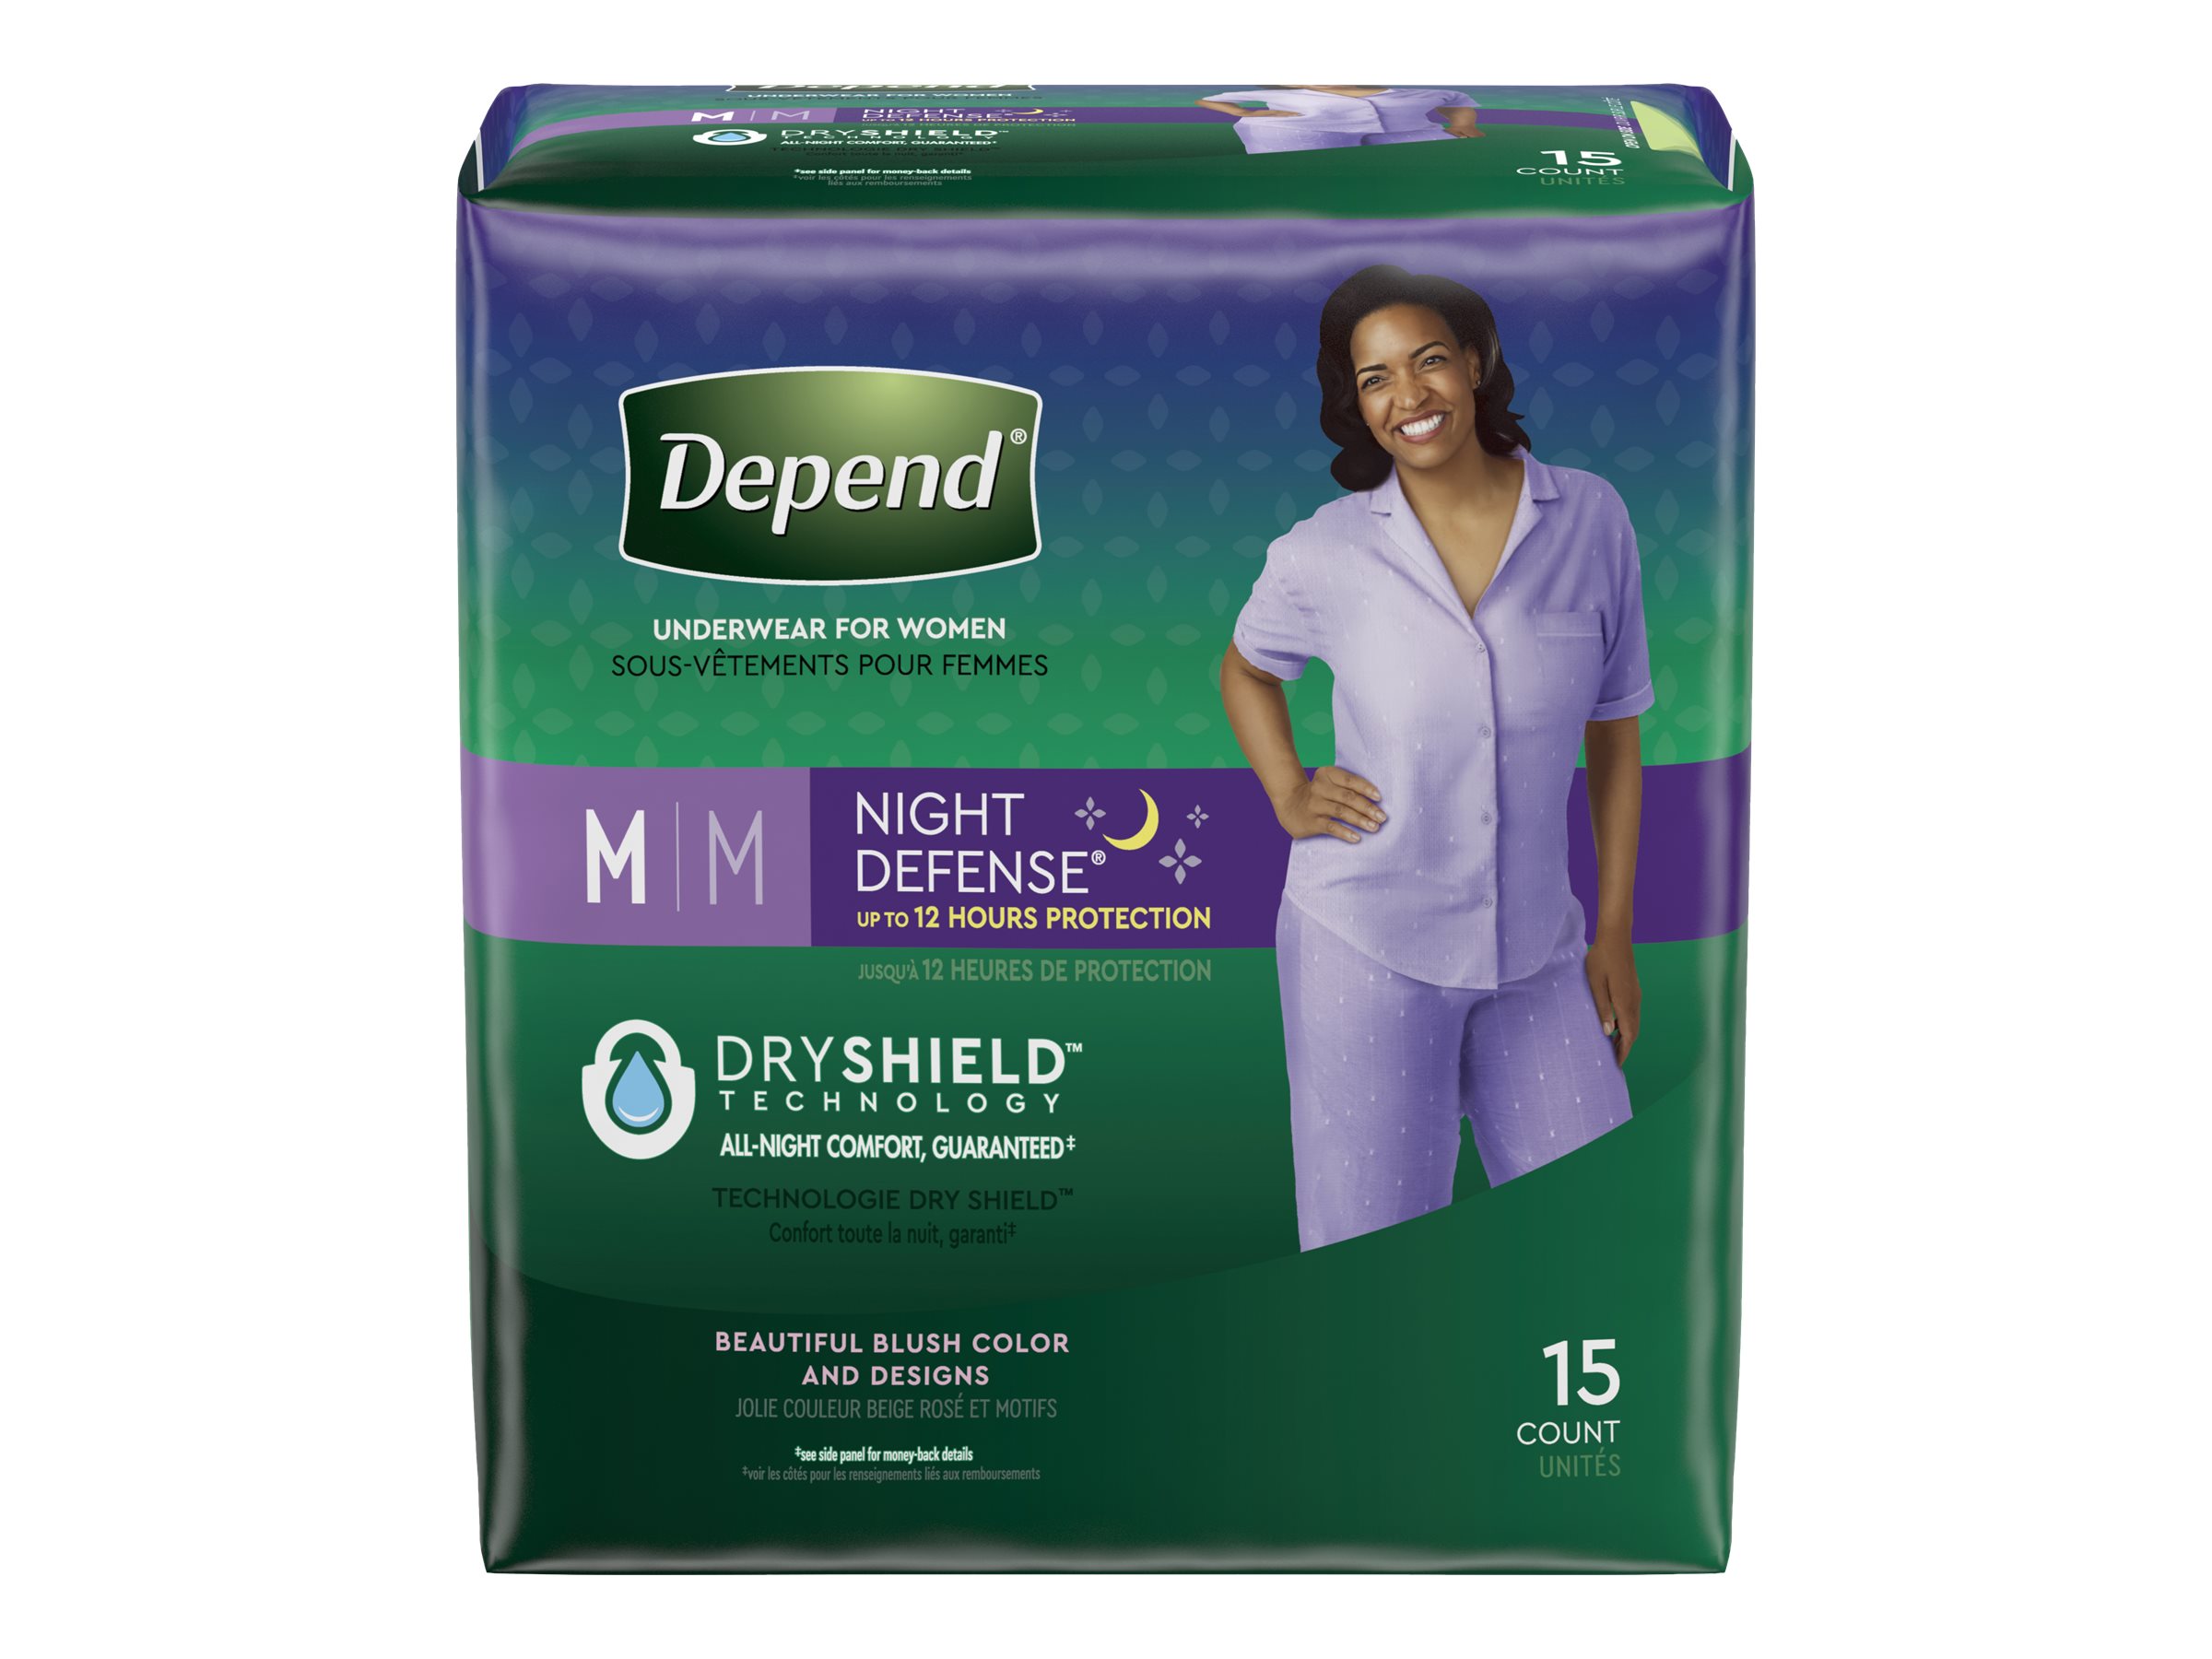 Depend Night Defense Adult Incontinence Underwear for Women, Overnight, XL,  Blush, 12 Count;Depend Night Defense Adult Incontinence Underwear for